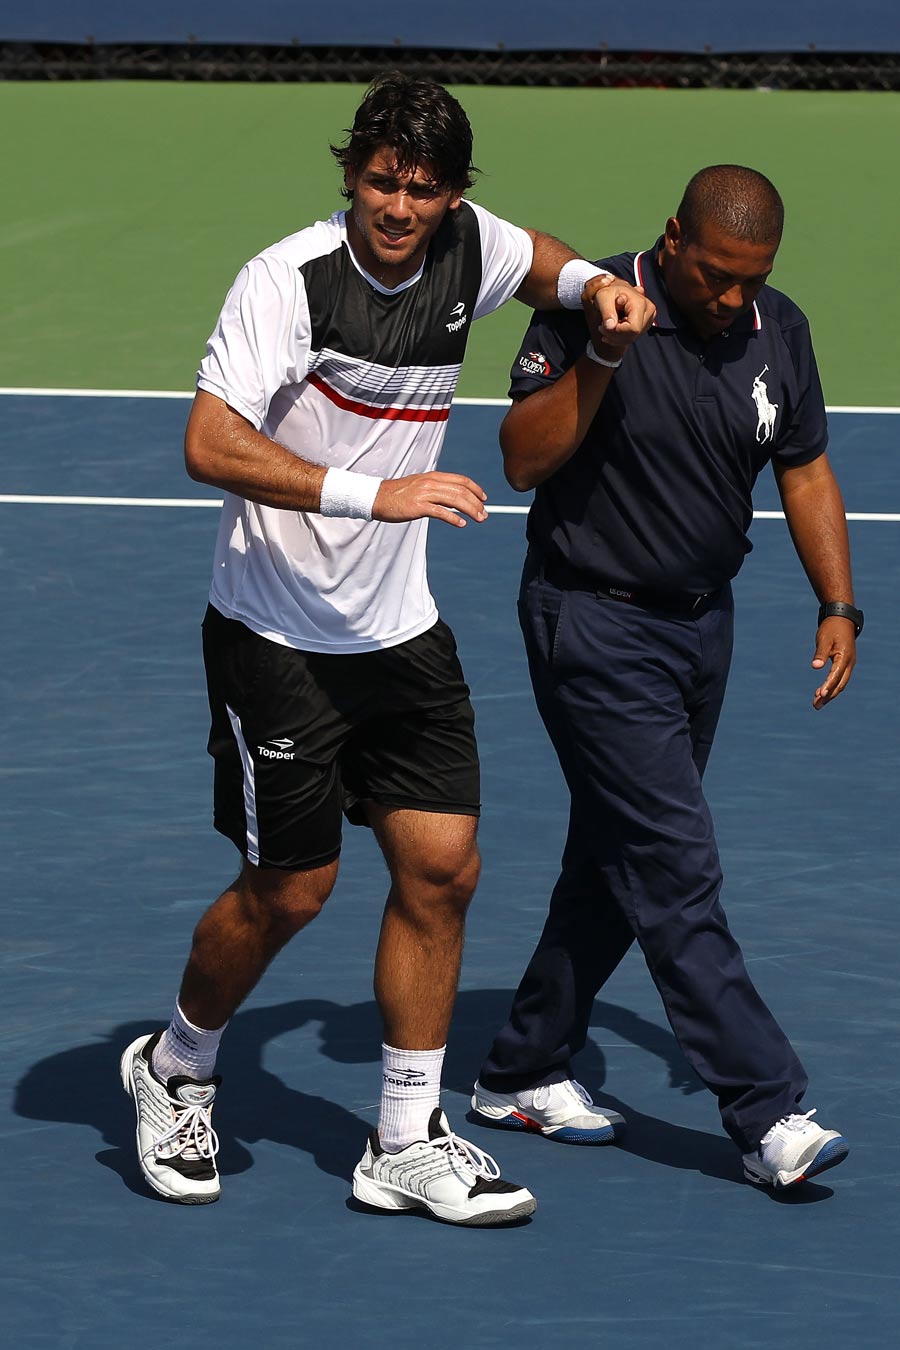 Eduardo Schwank is helped off the court with an injury